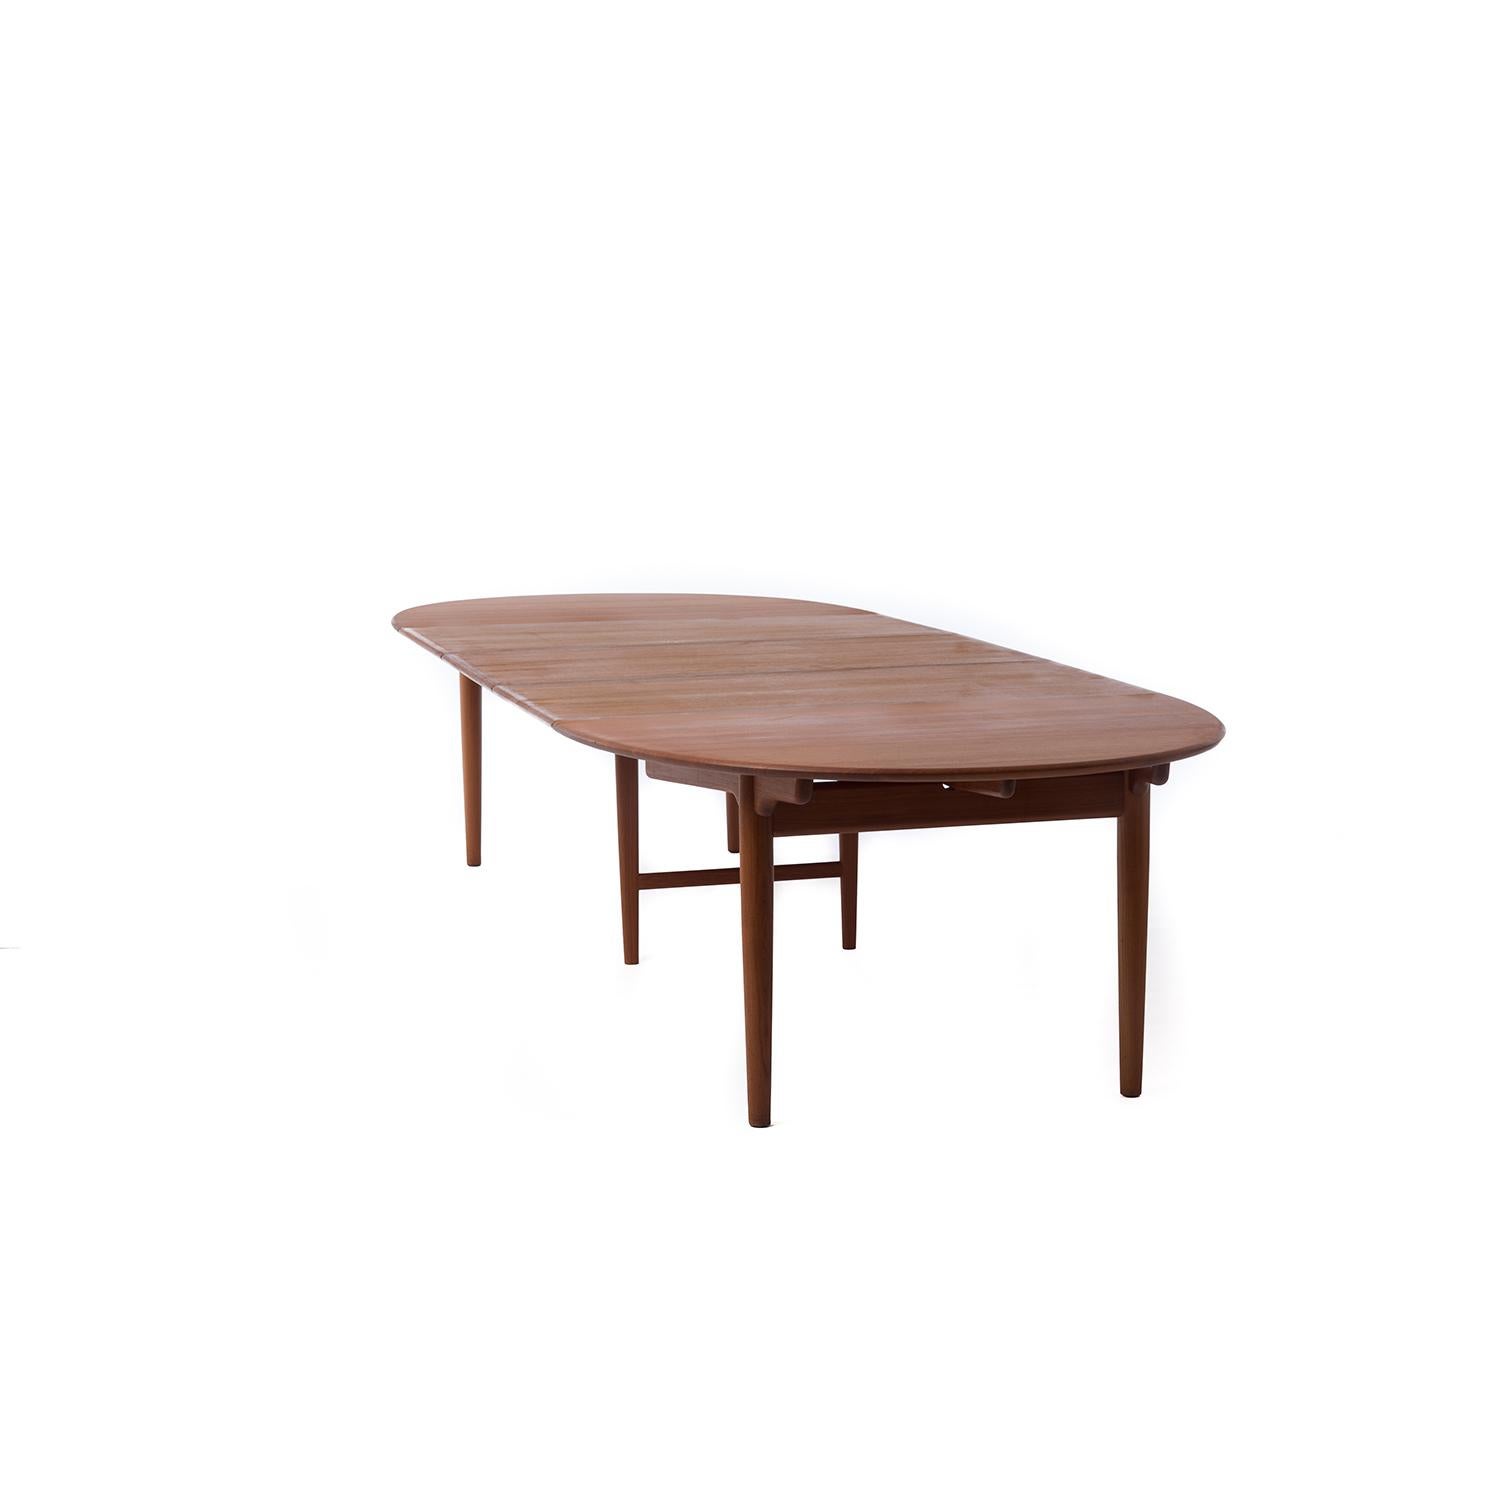 Hans J Wegner/Johannes Hansen 567 Teak Dining Table with Three Leaves In Excellent Condition For Sale In Minneapolis, MN